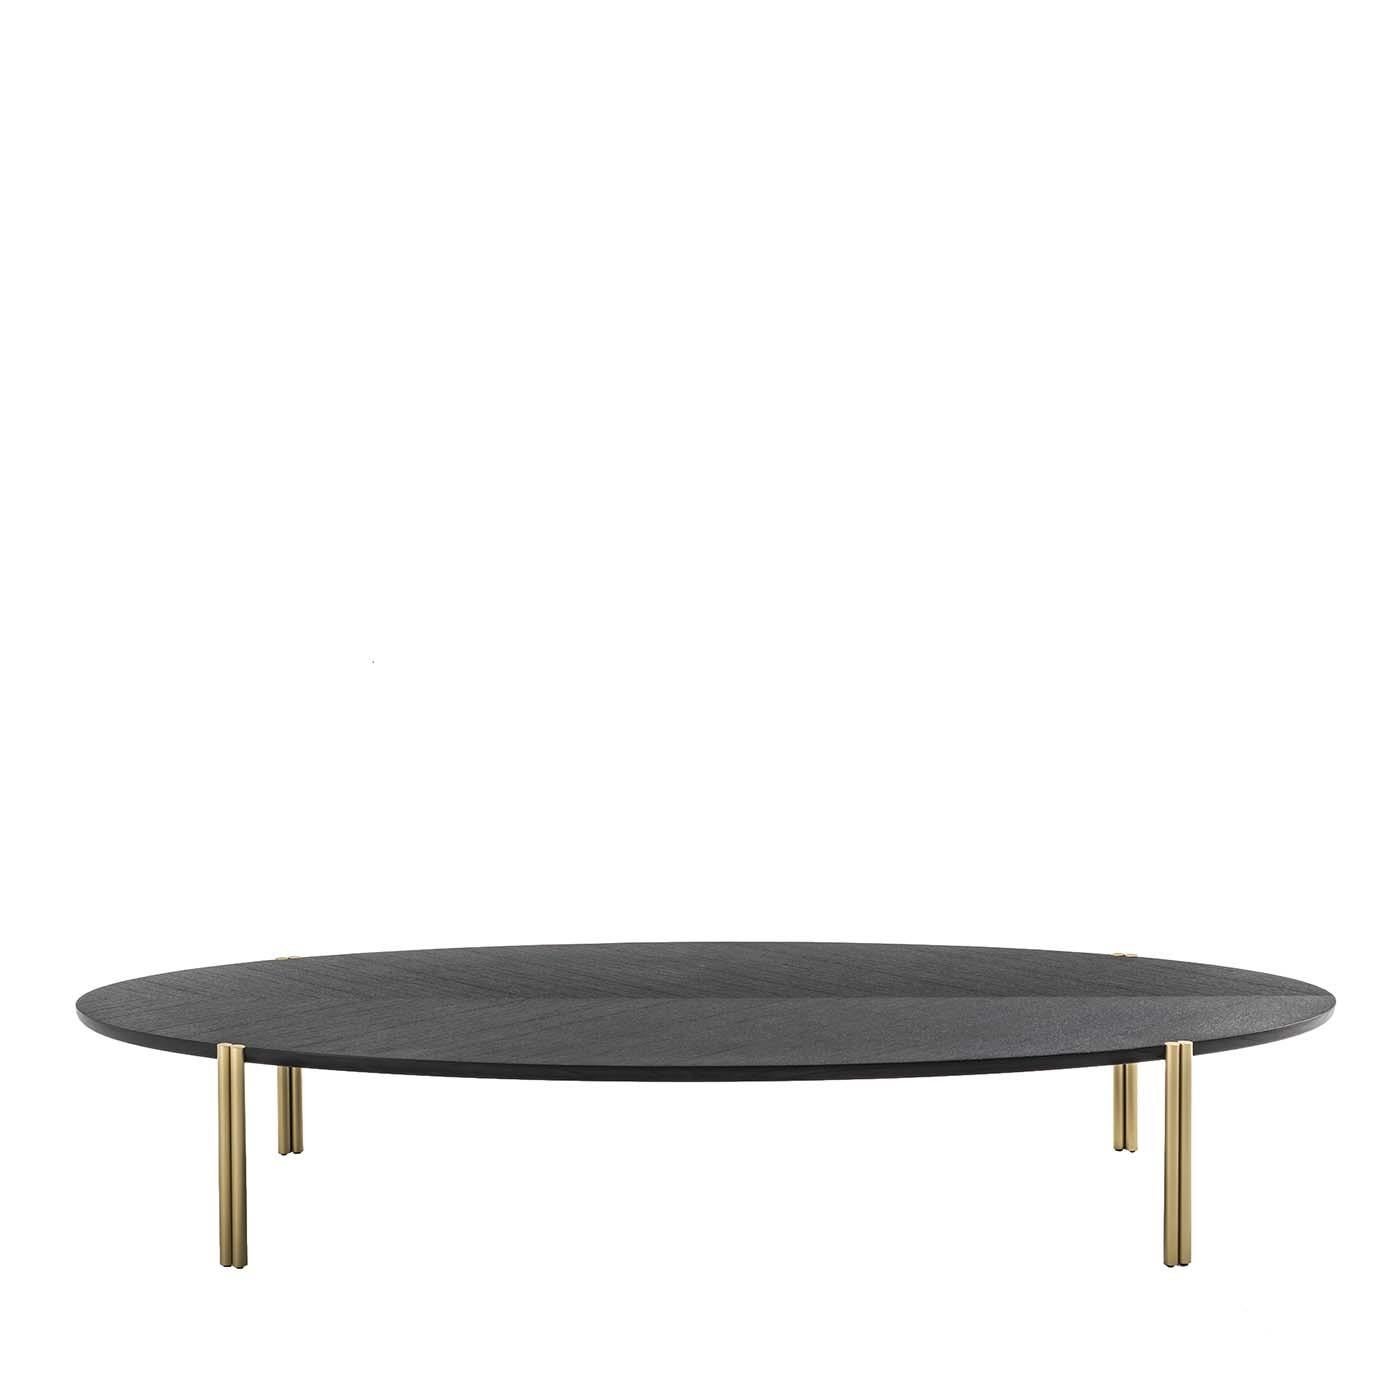 With a sleek and stylish design, the jean ordinary coffee table will perfectly suit any environment, in either a classic or modern style. The legs are available in brass or iron lacquered in a gunmetal gray finish and the top is crafted from wood,